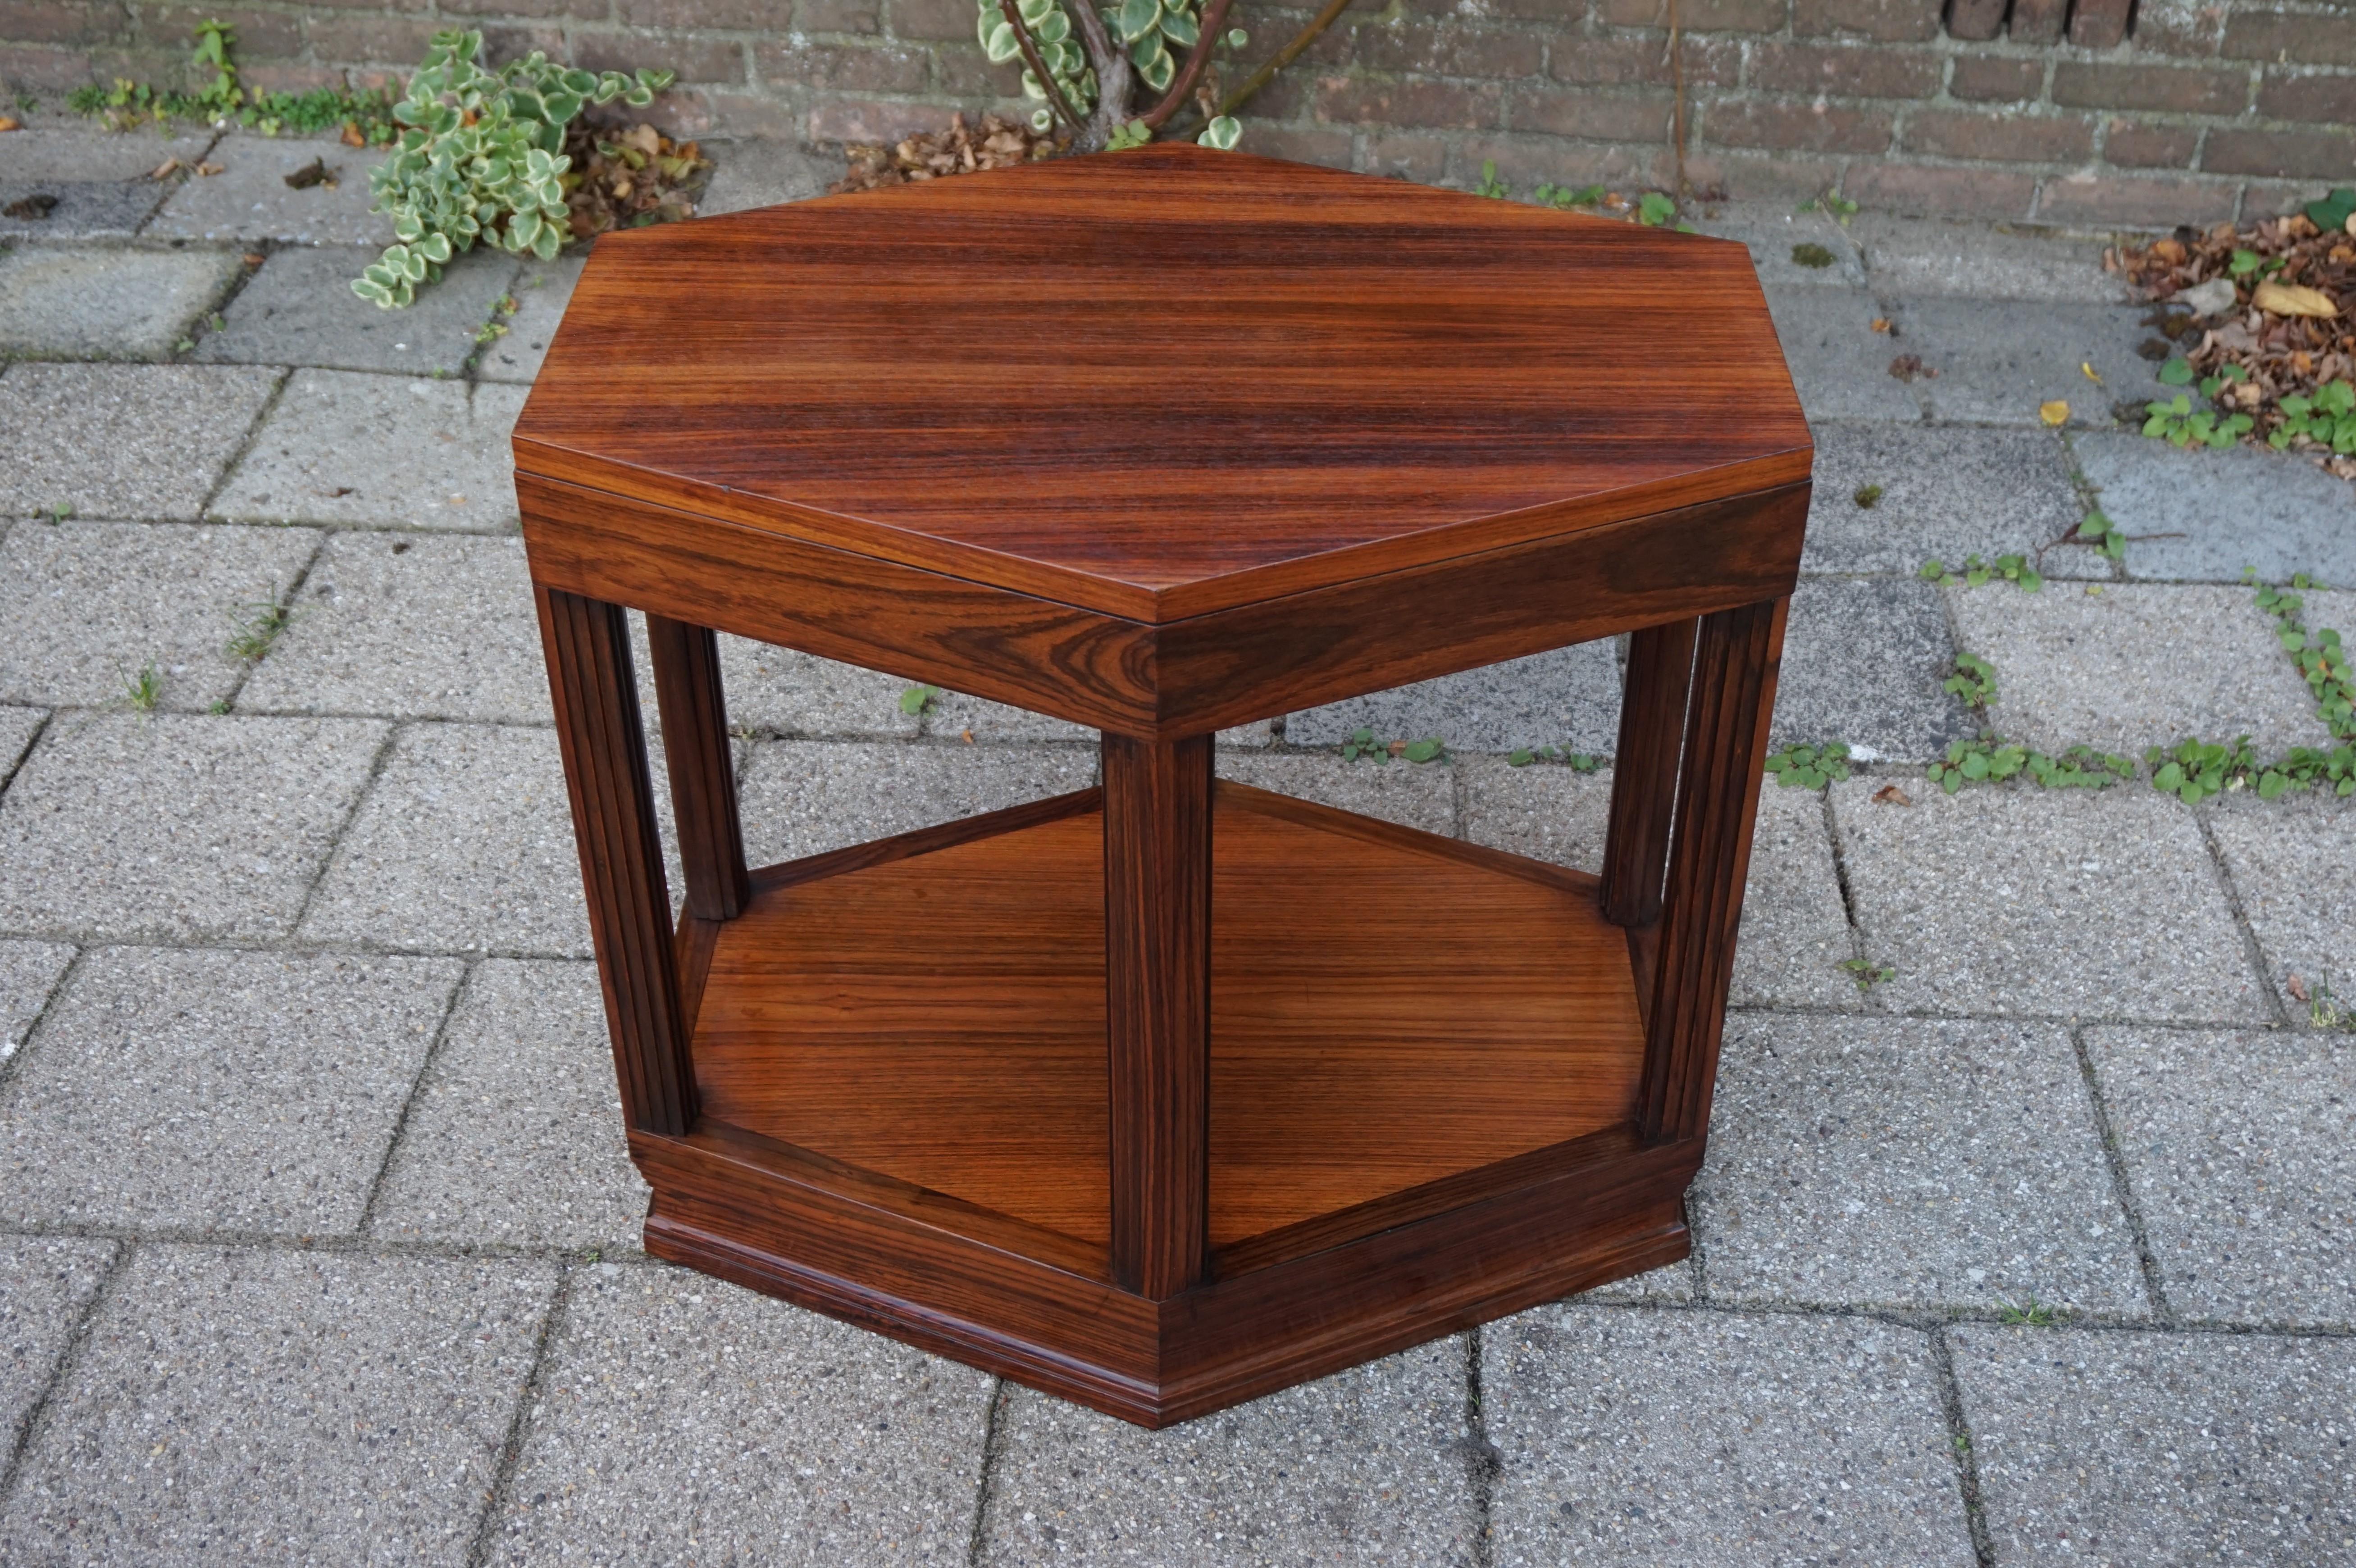 Marvelous materials AND design, Art Deco table.

When we first saw this stunning coffee table we immediately knew it had to be ours. We didn't hesitate, because this is the type of antique that -both in terms of design and condition- you only come